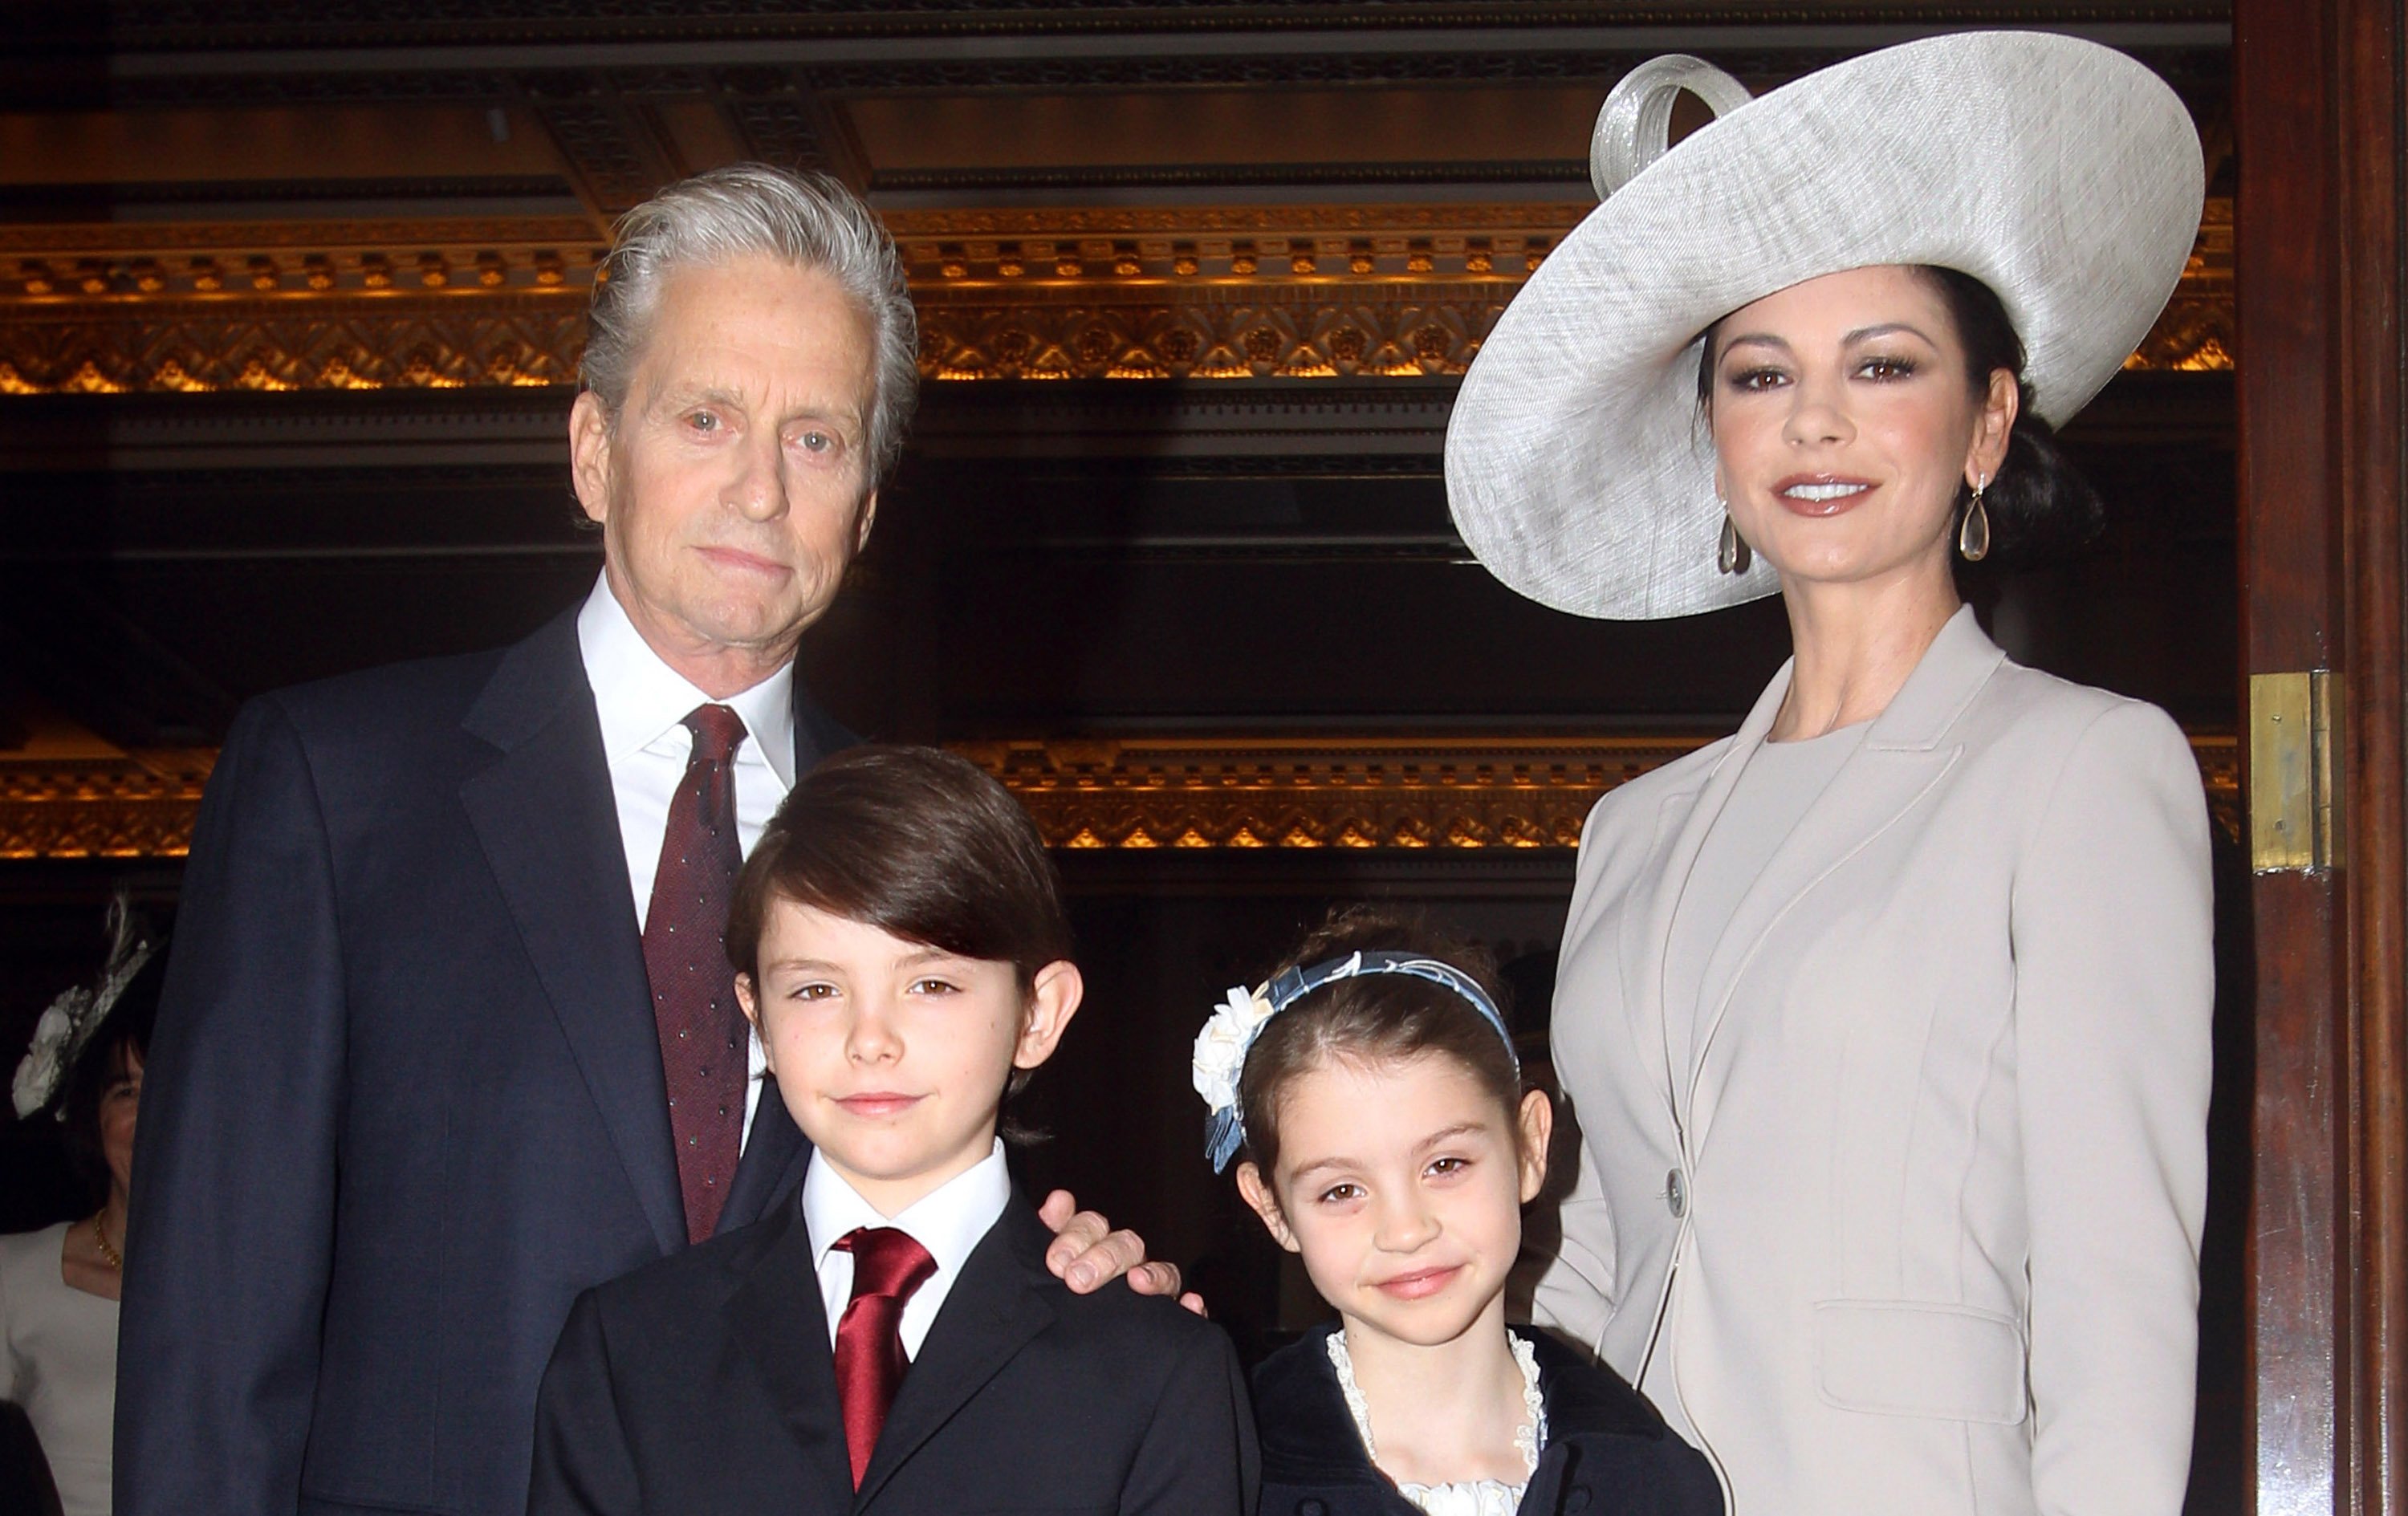 Catherine Zeta-Jones arrives with her husband, actor Michael Douglas and their children Dylan and Carys Douglas, to attend a Royal Investiture at Buckingham Palace on February 24, 2011 in London, England ┃Source: Getty Images